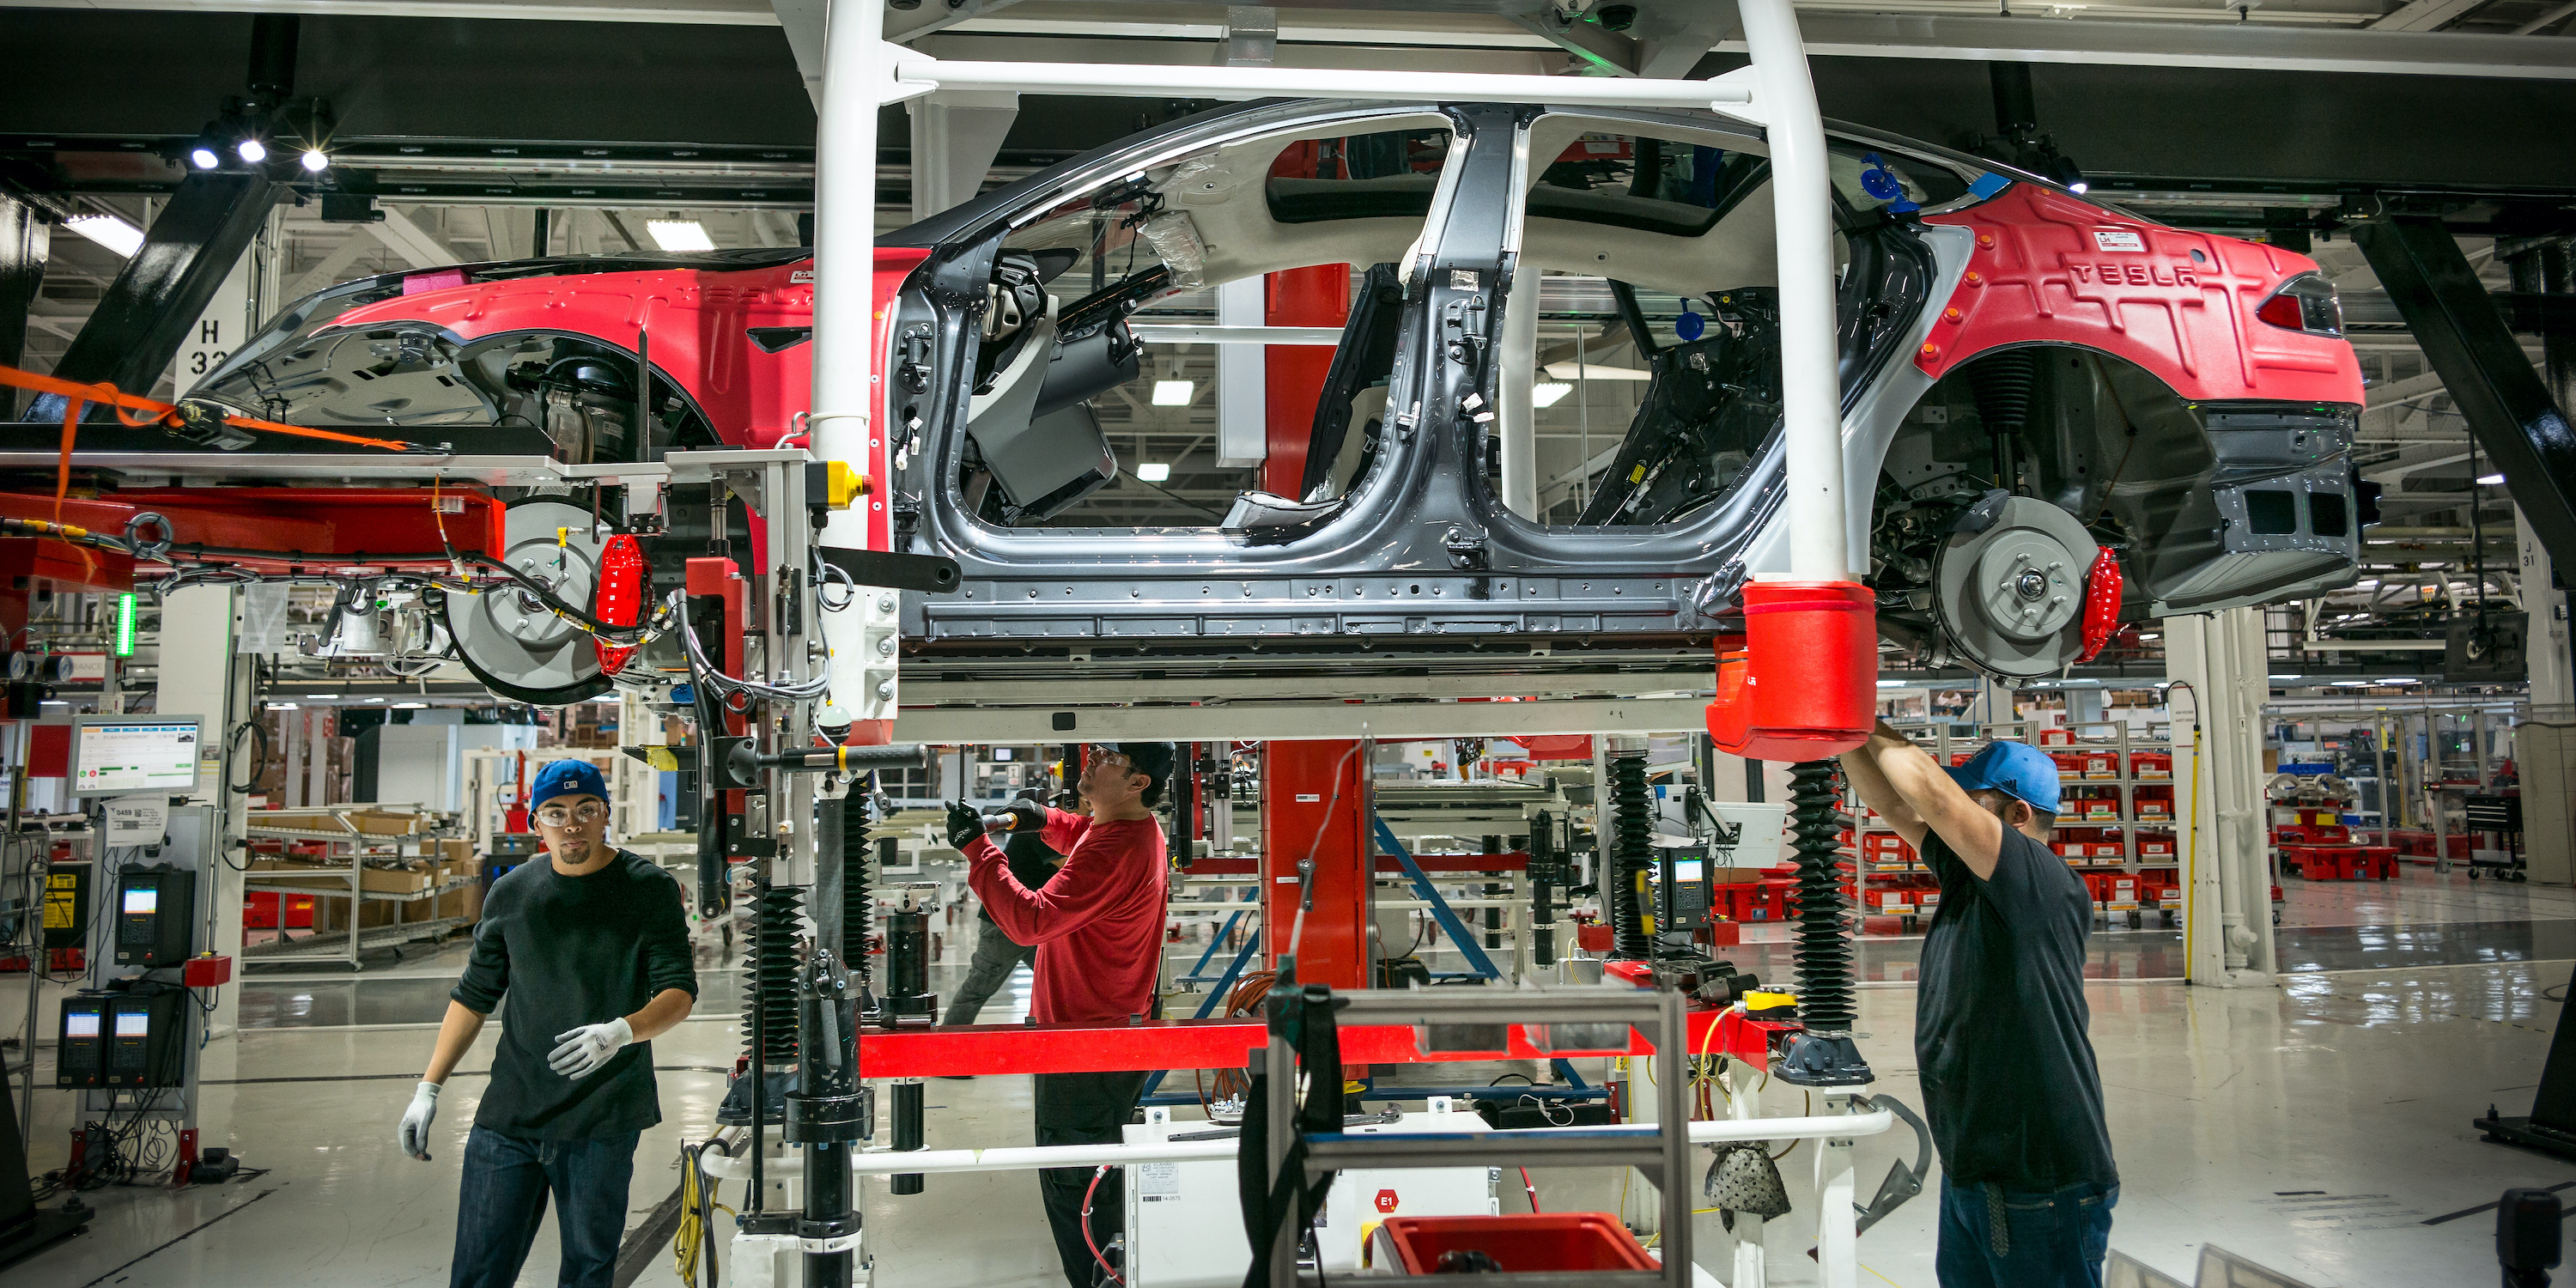 In an email to employees Tesla says it will cut salaries and furlough non-essential employees